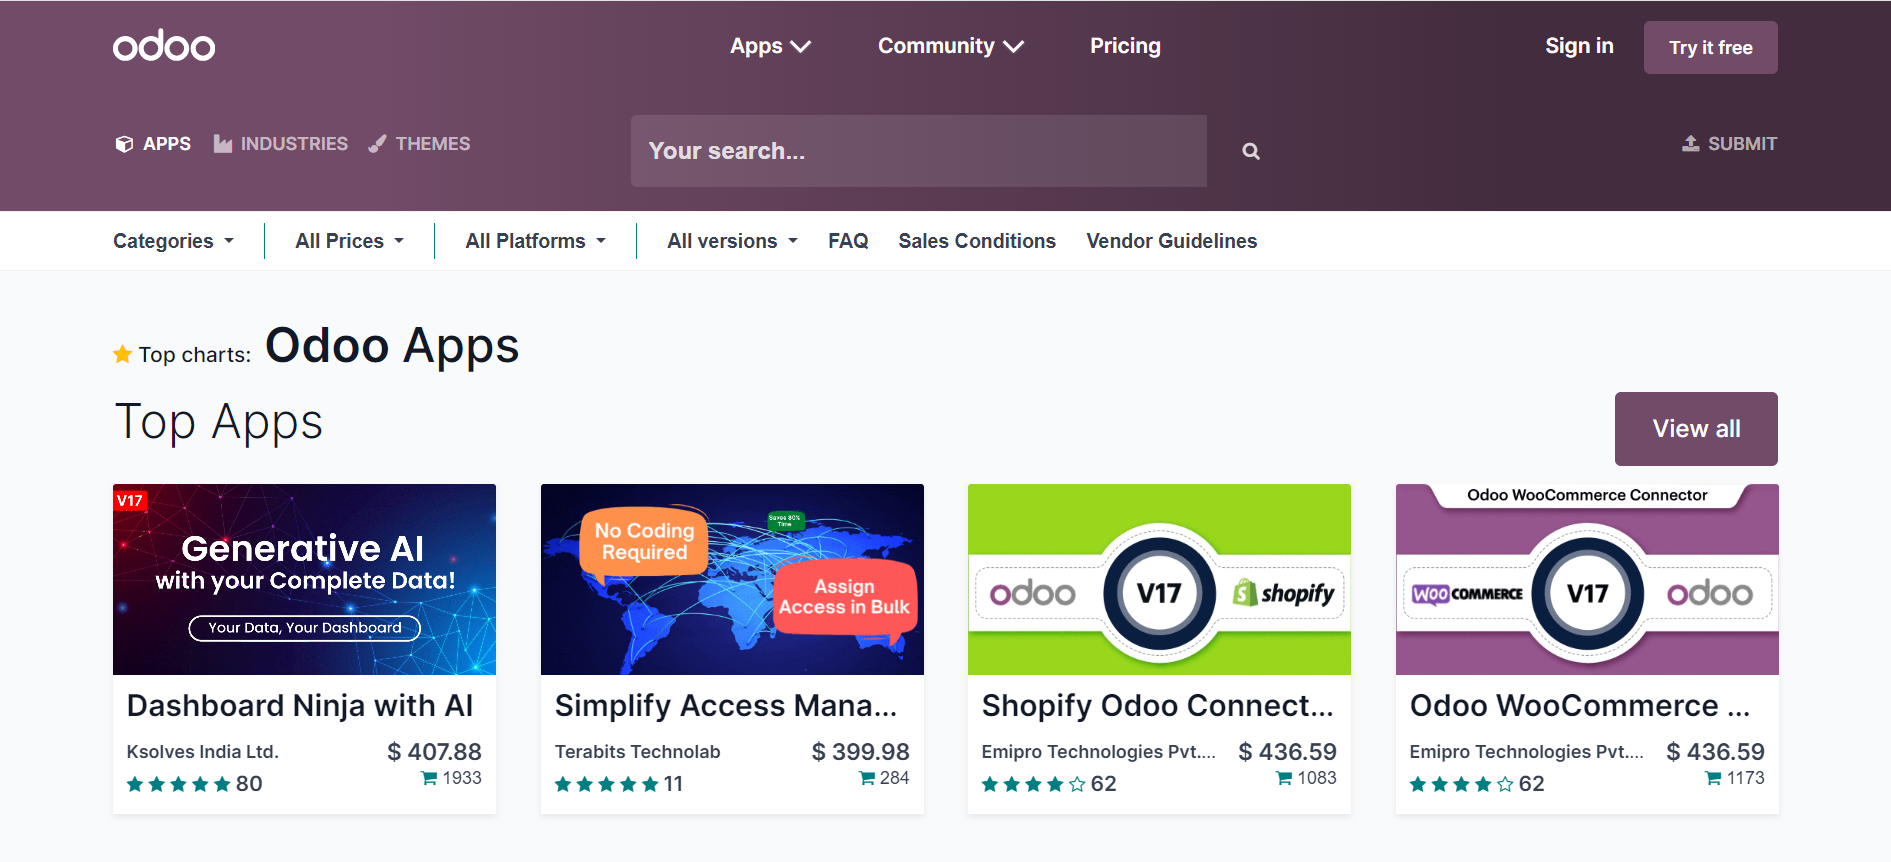 How to publish odoo app on App Store